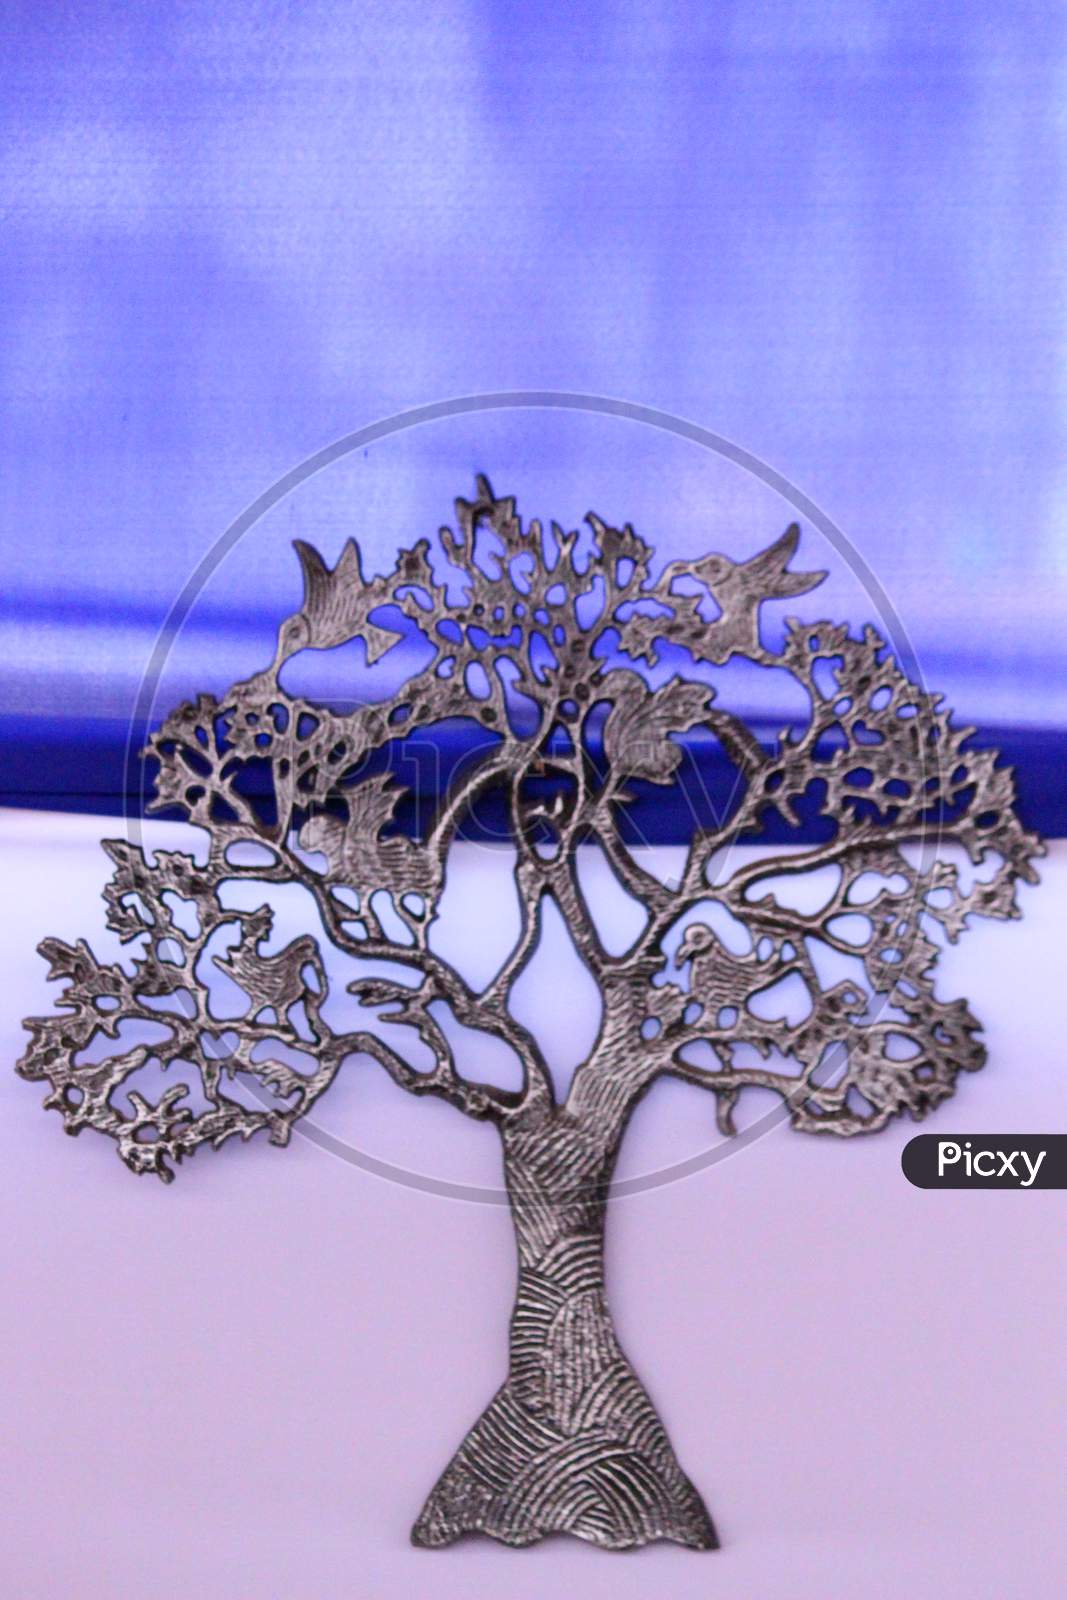 Bonsai Metal Tree Isolated With Blue And Pink Background.